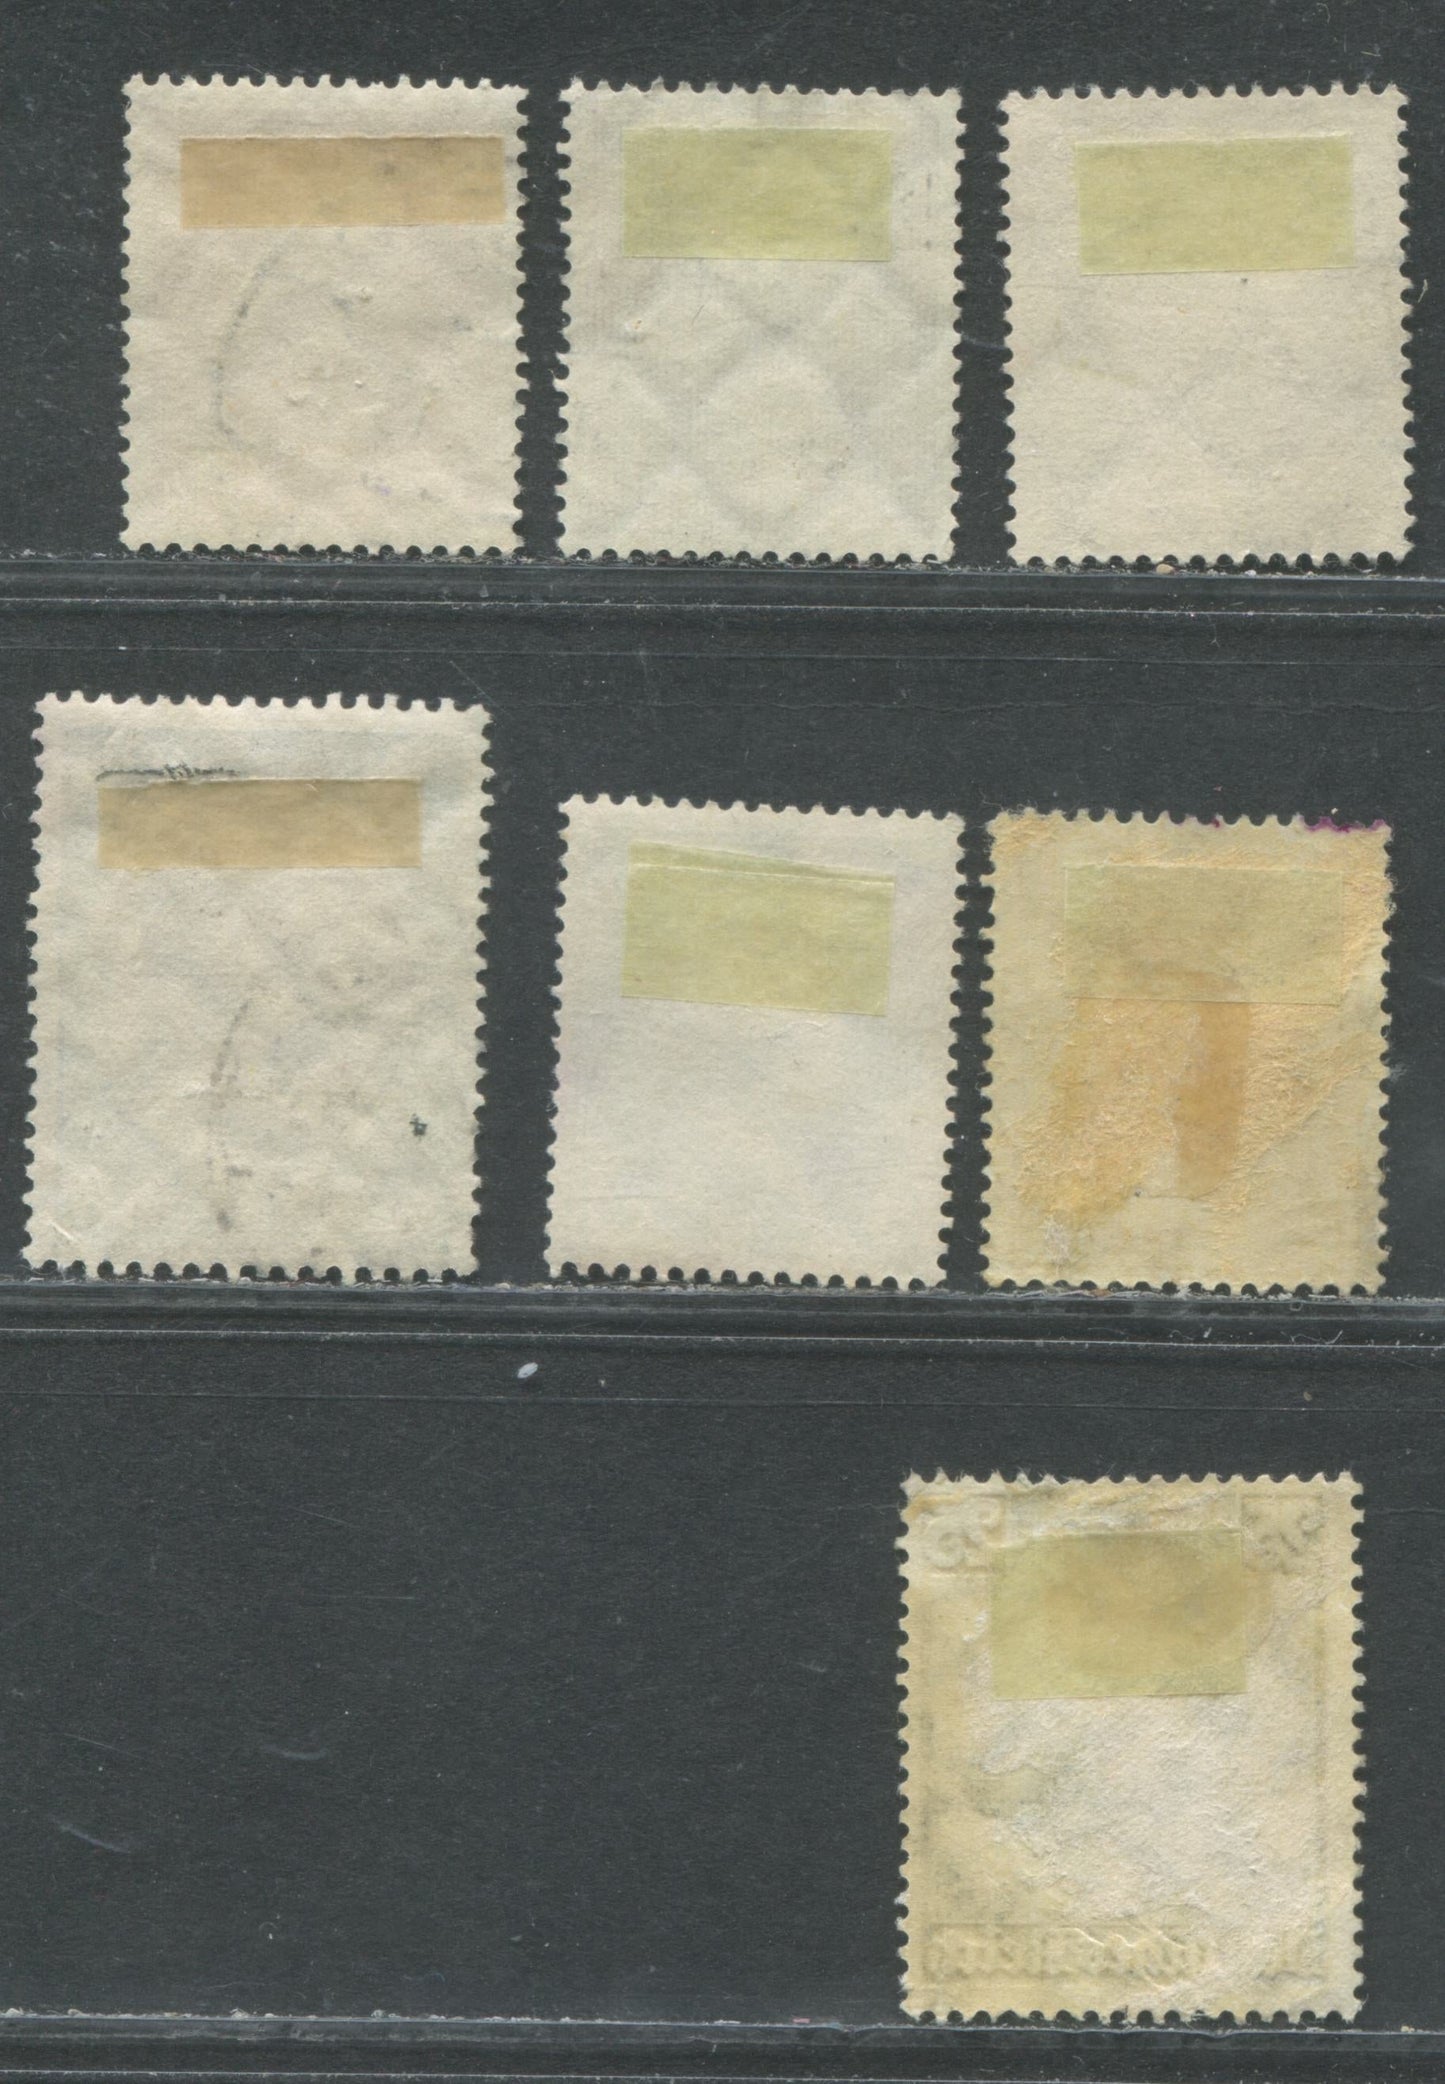 Lot 264 Germany SC#362/461 1926-1935 Definitives, 7 Fine Used Singles, Click on Listing to See ALL Pictures, 2022 Scott Classic Cat. $18.05 USD